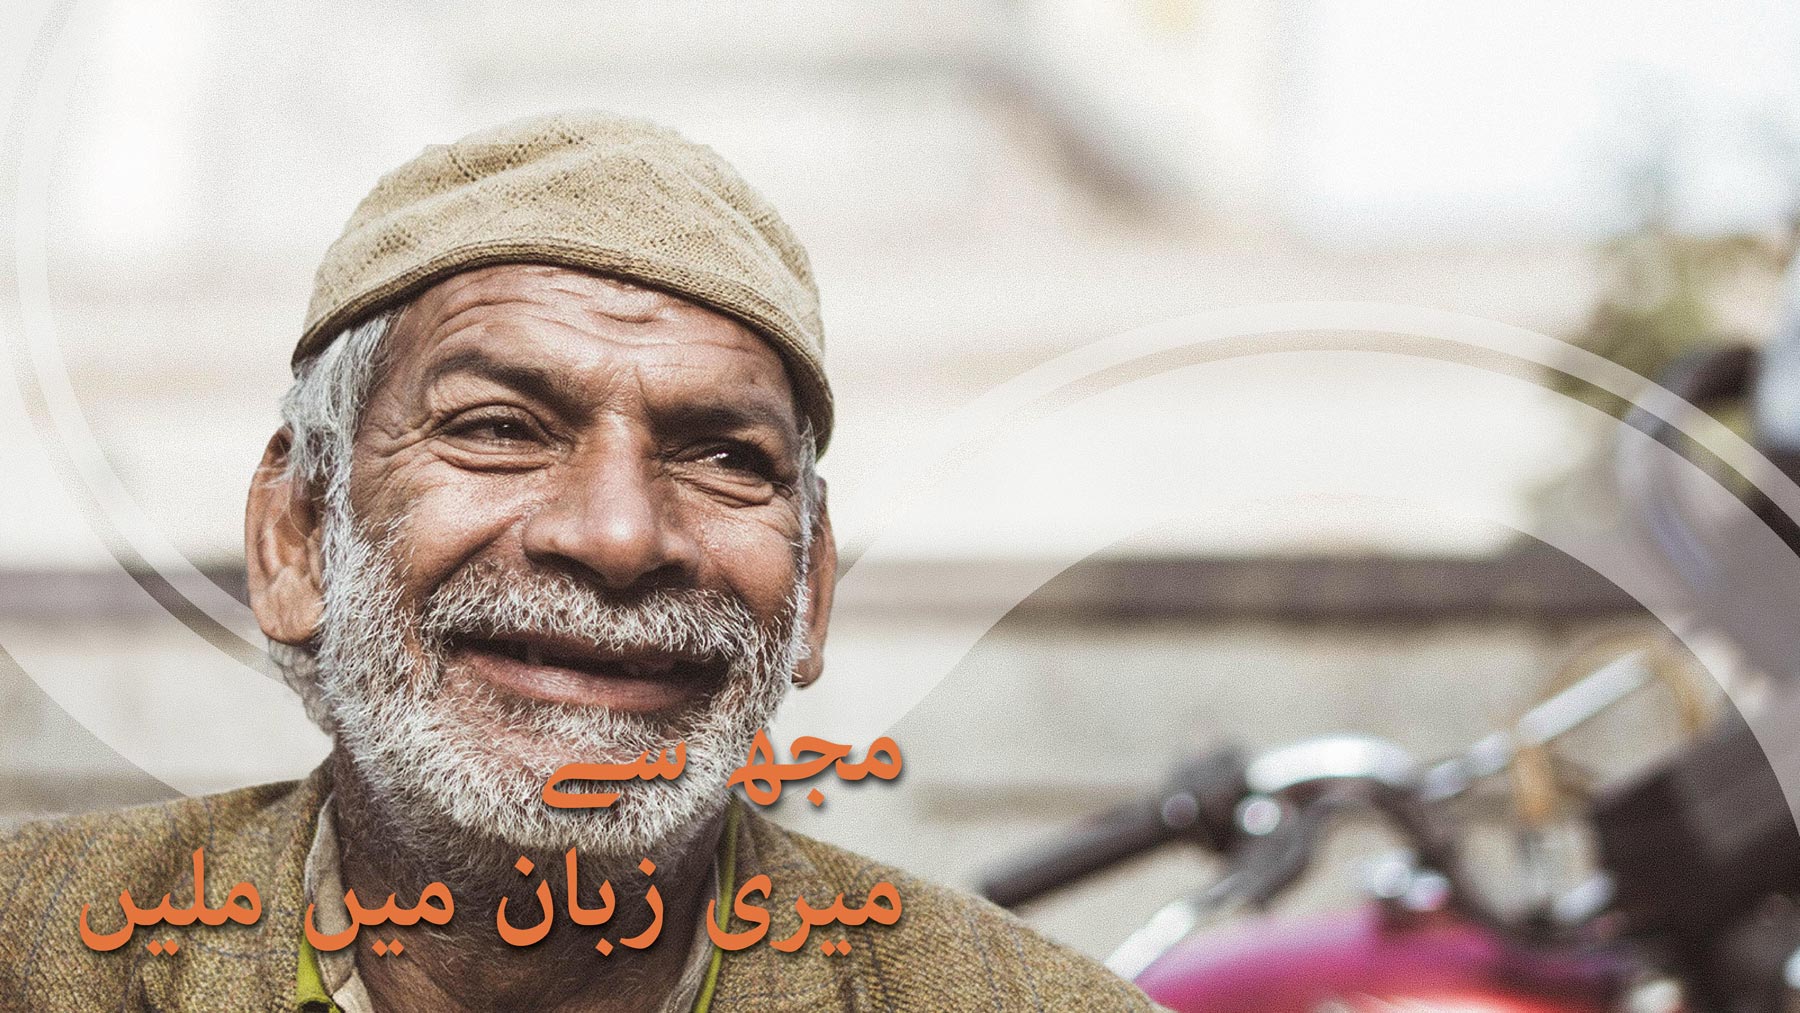 Man with grey beard smiling and Arabic text